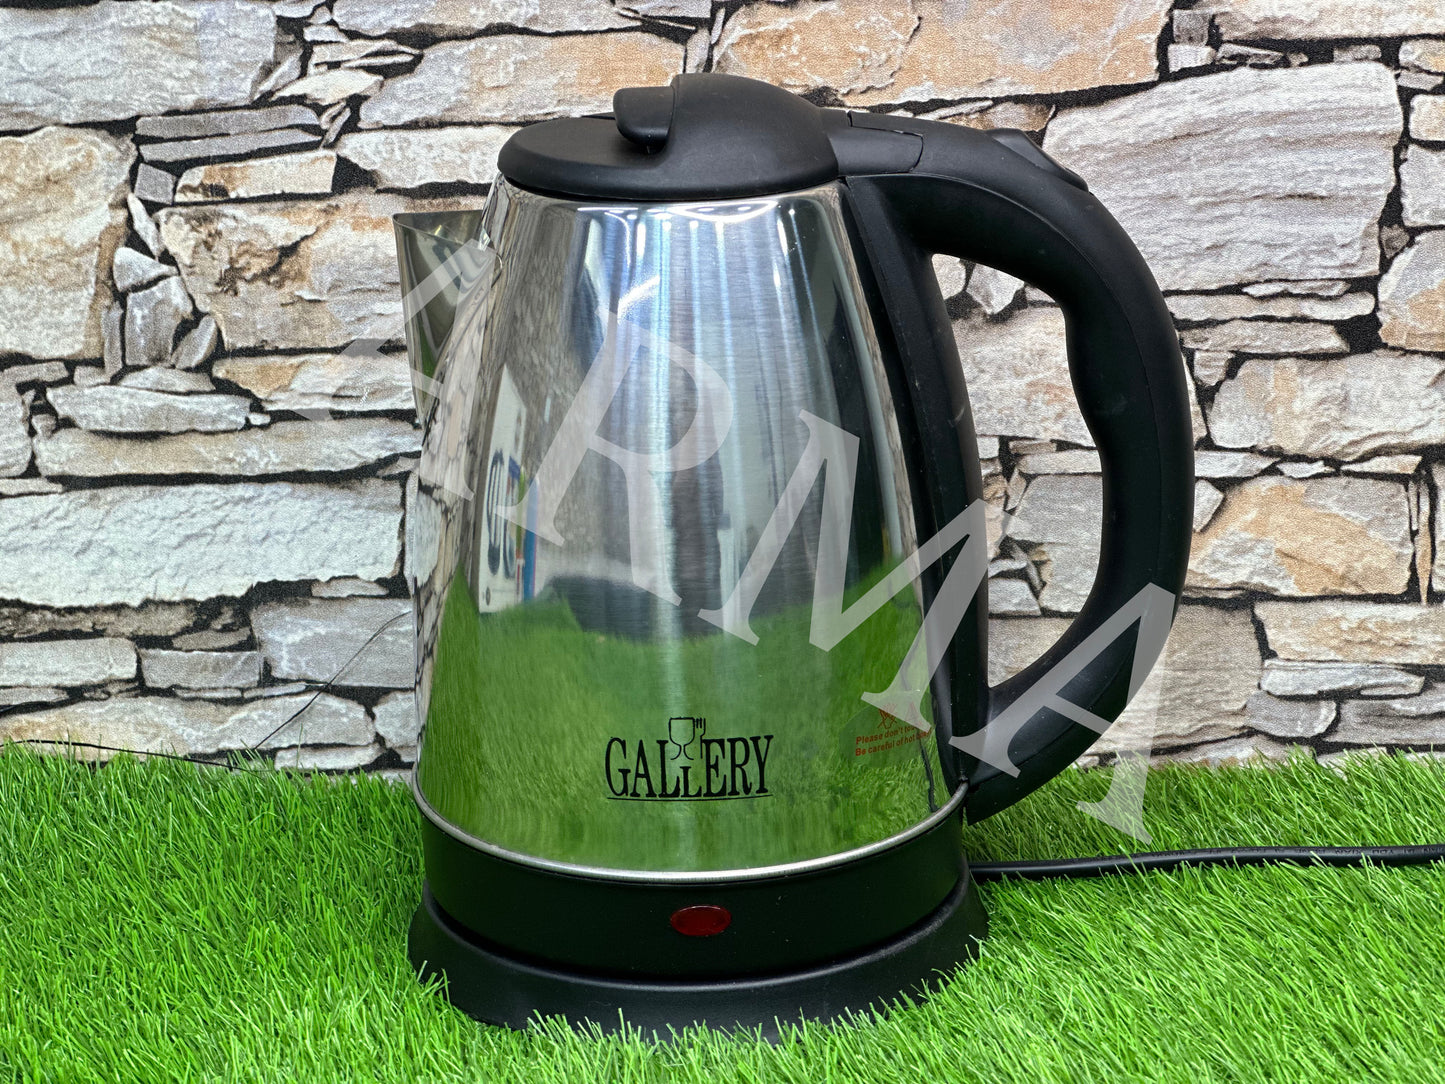 Gallery Electric Kettle | 1.8 Liter Capacity